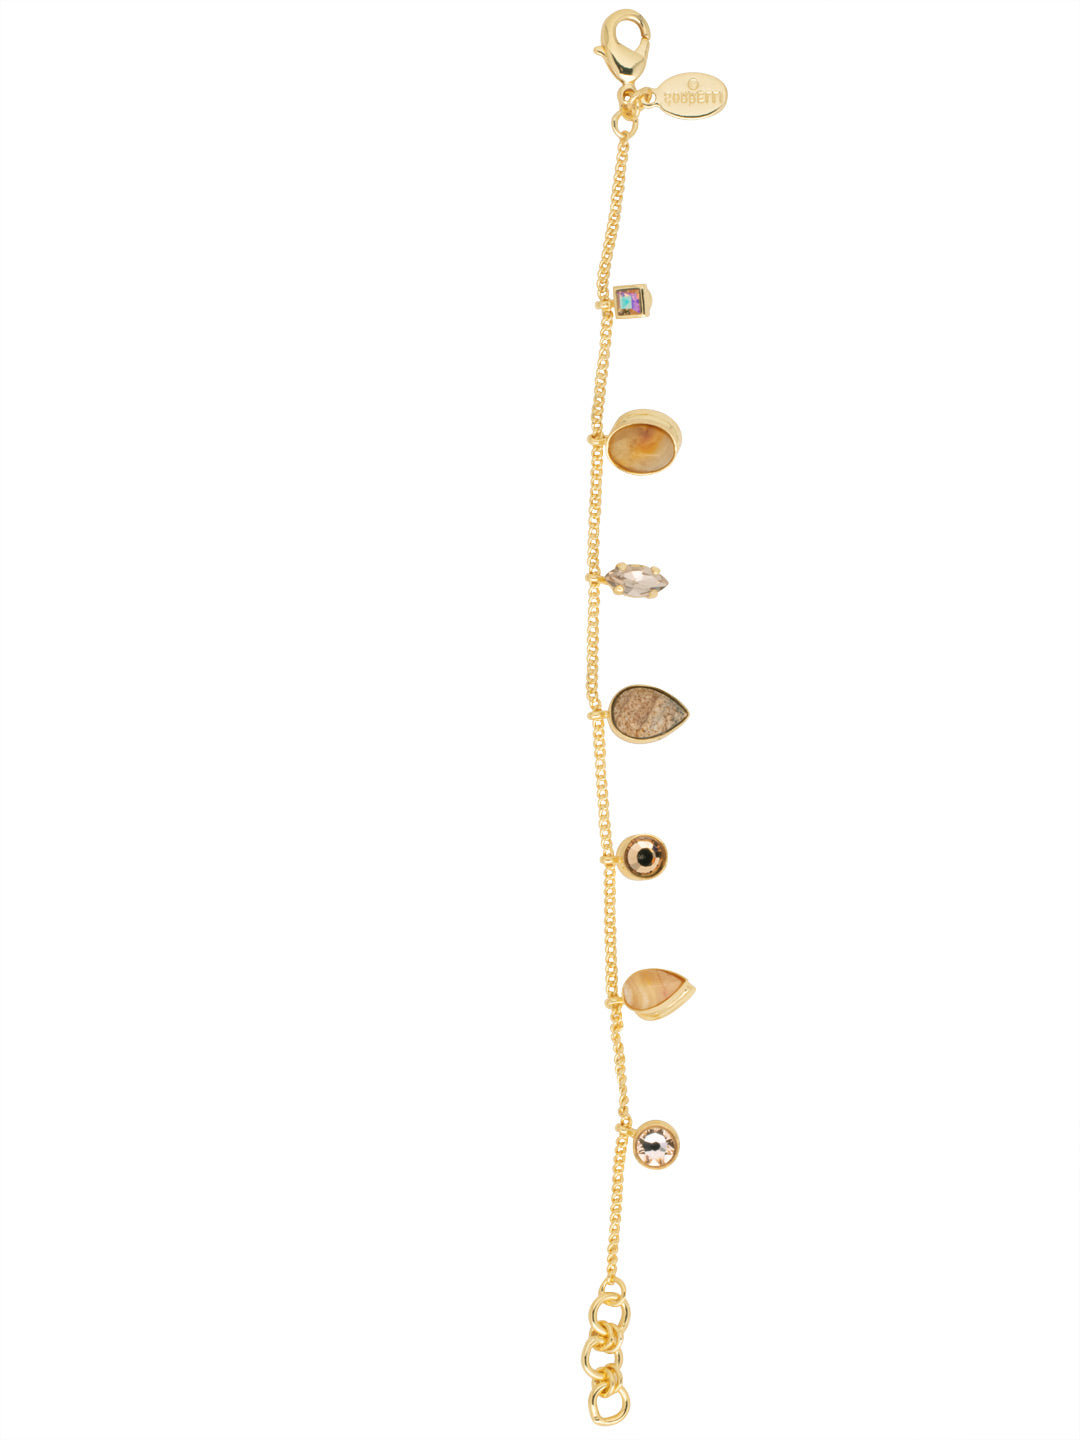 Elaina Tennis Bracelet - BFC70BGRSU - <p>The Elaina Tennis Bracelet features an assortment of delicate crystal and semi-precious charms on an adjustable lightweight chain, secured with a lobster claw clasp. From Sorrelli's Raw Sugar collection in our Bright Gold-tone finish.</p>